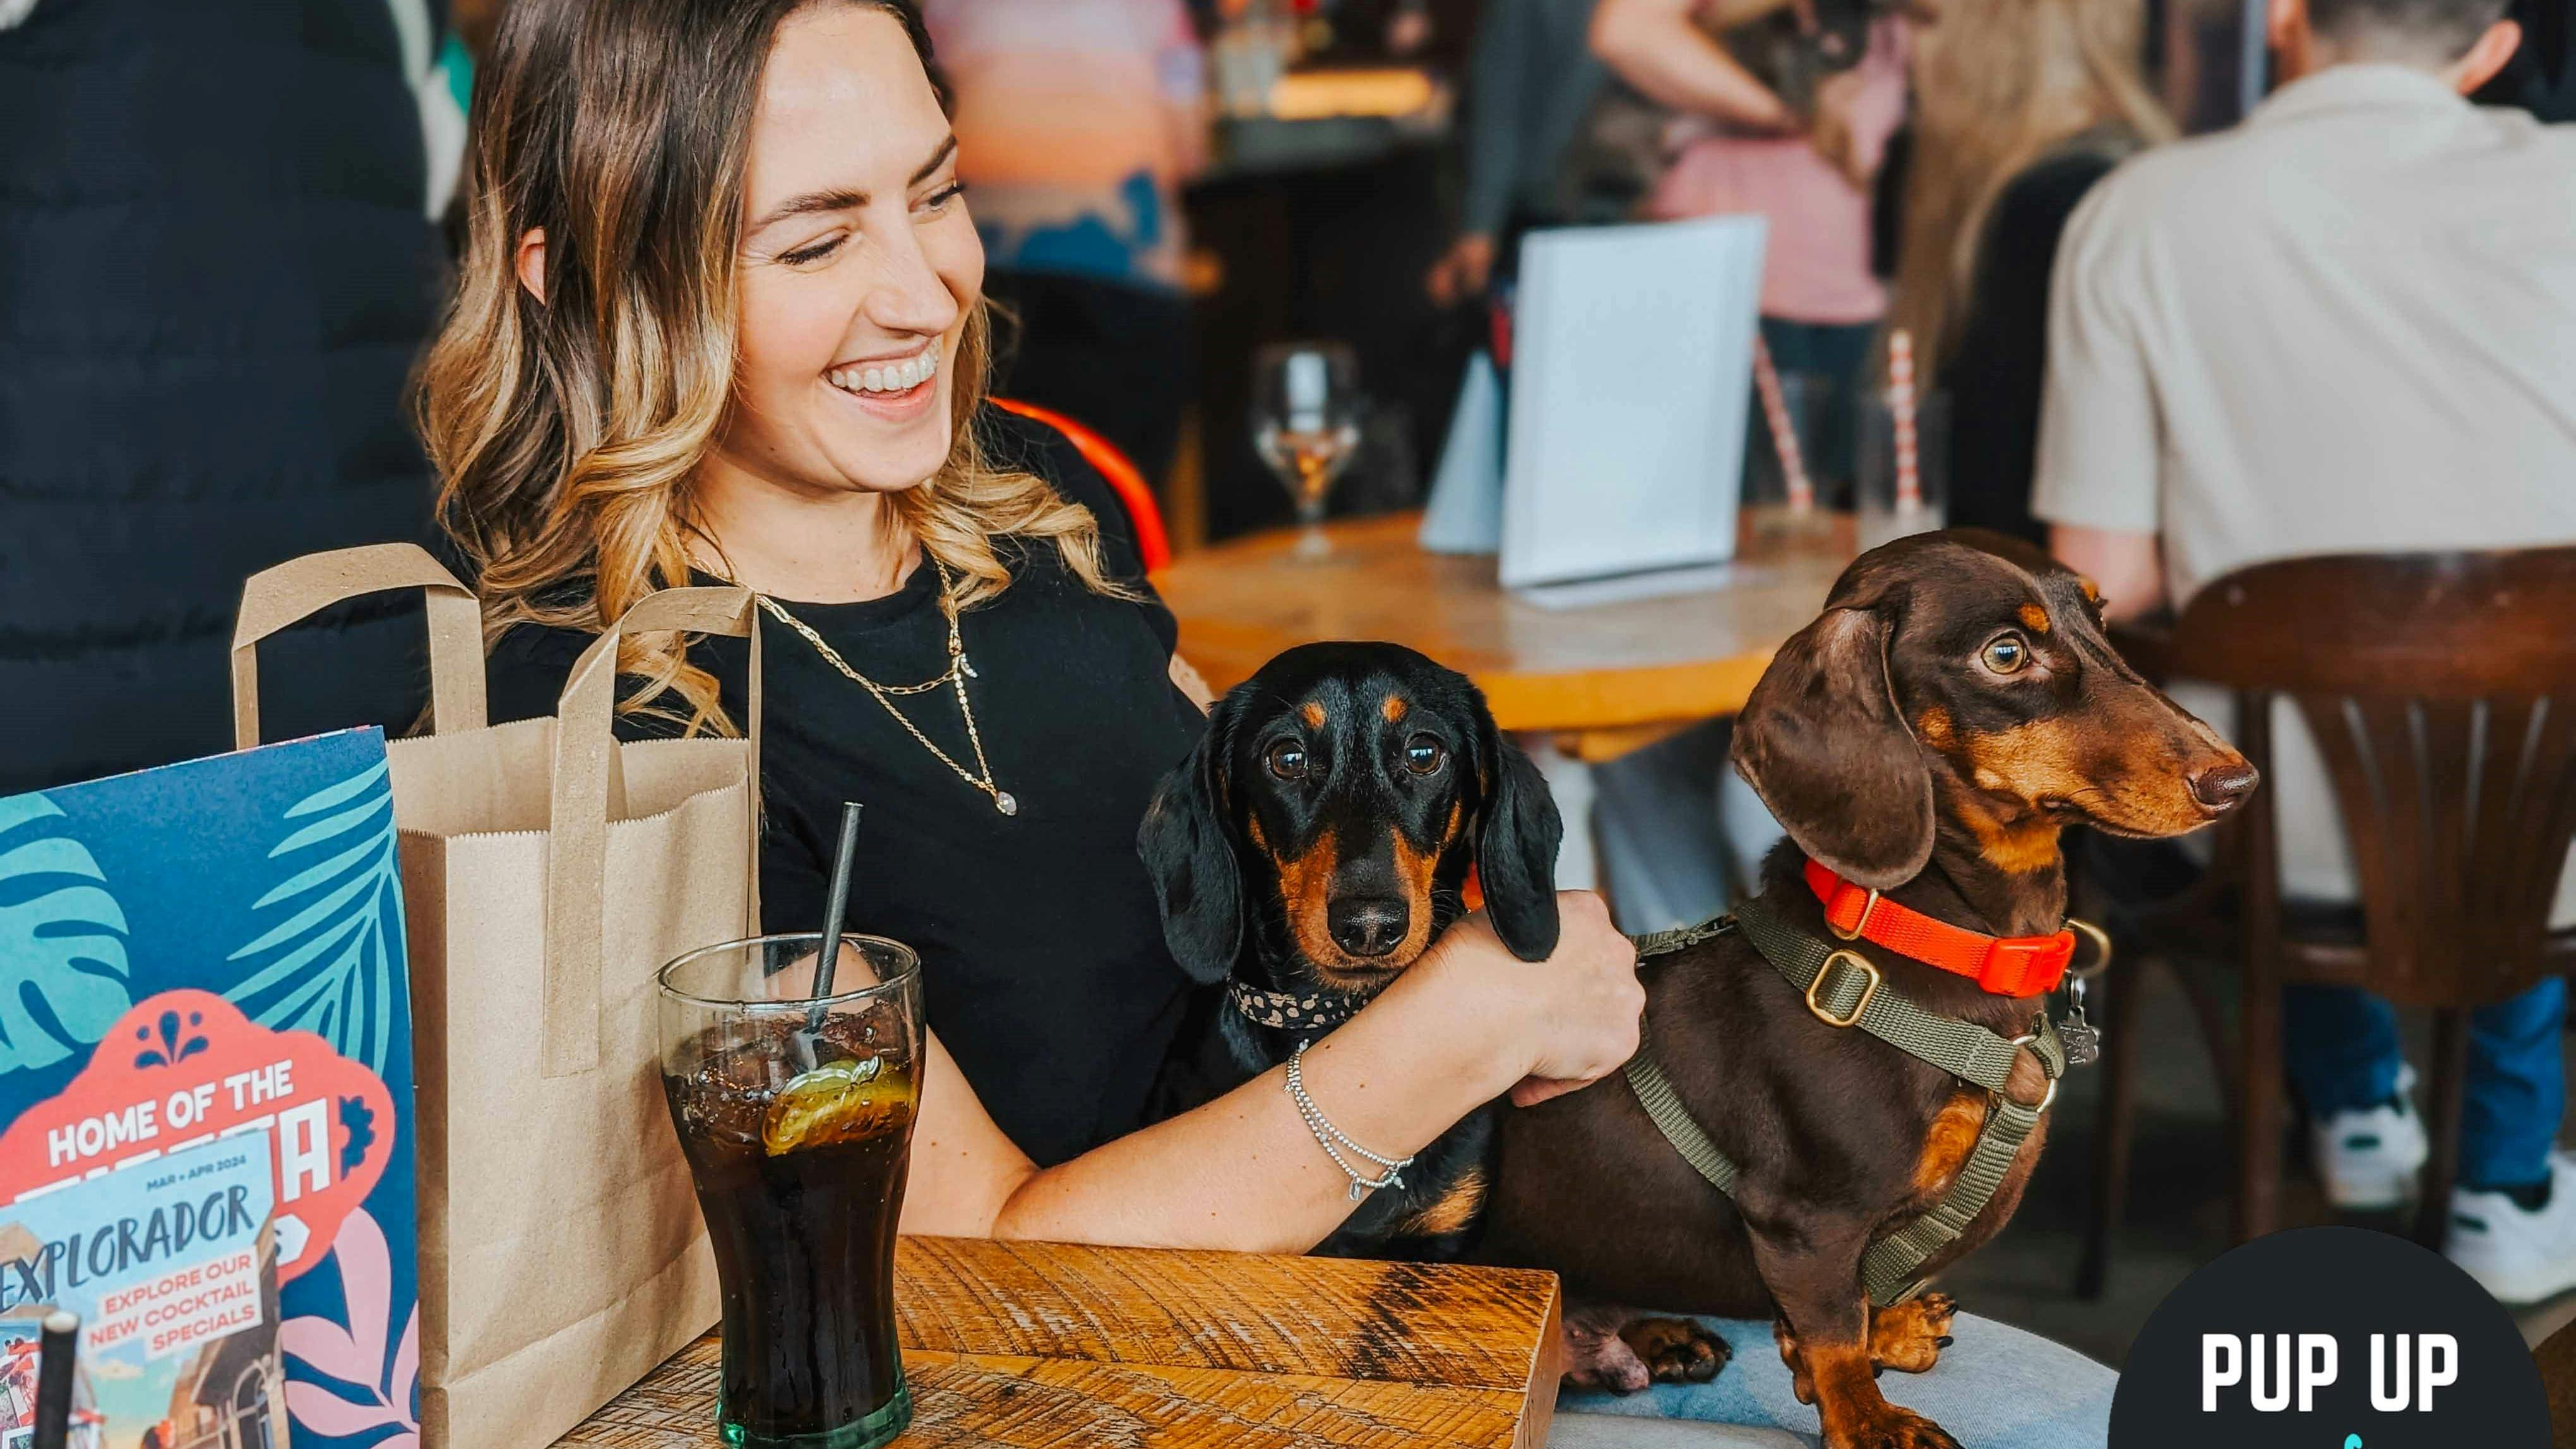 A Dachshund pop-up cafe is coming to Glasgow next month